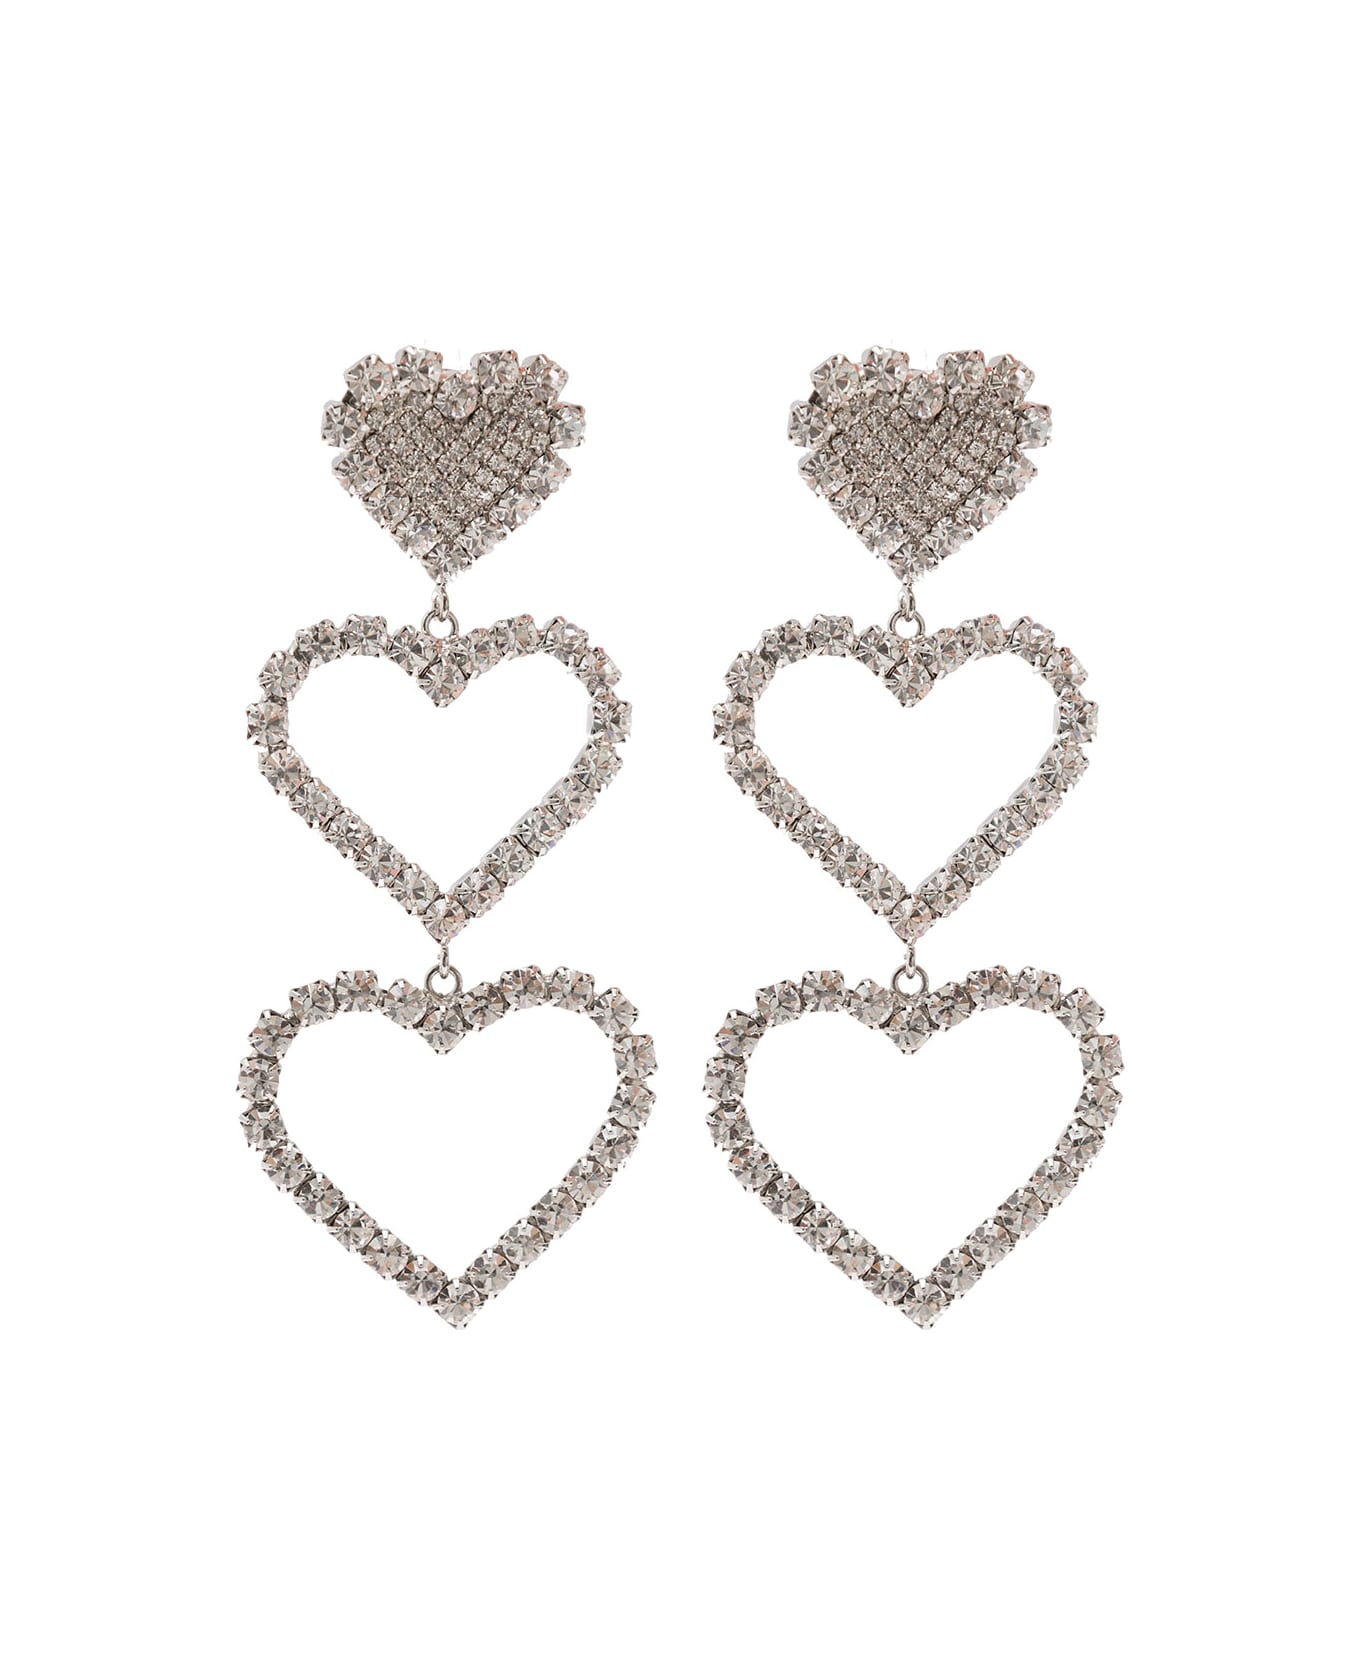 Alessandra Rich Silver-tone Pendant Earrings Hearts Design With Crystal Embellishment In Brass - Metallic